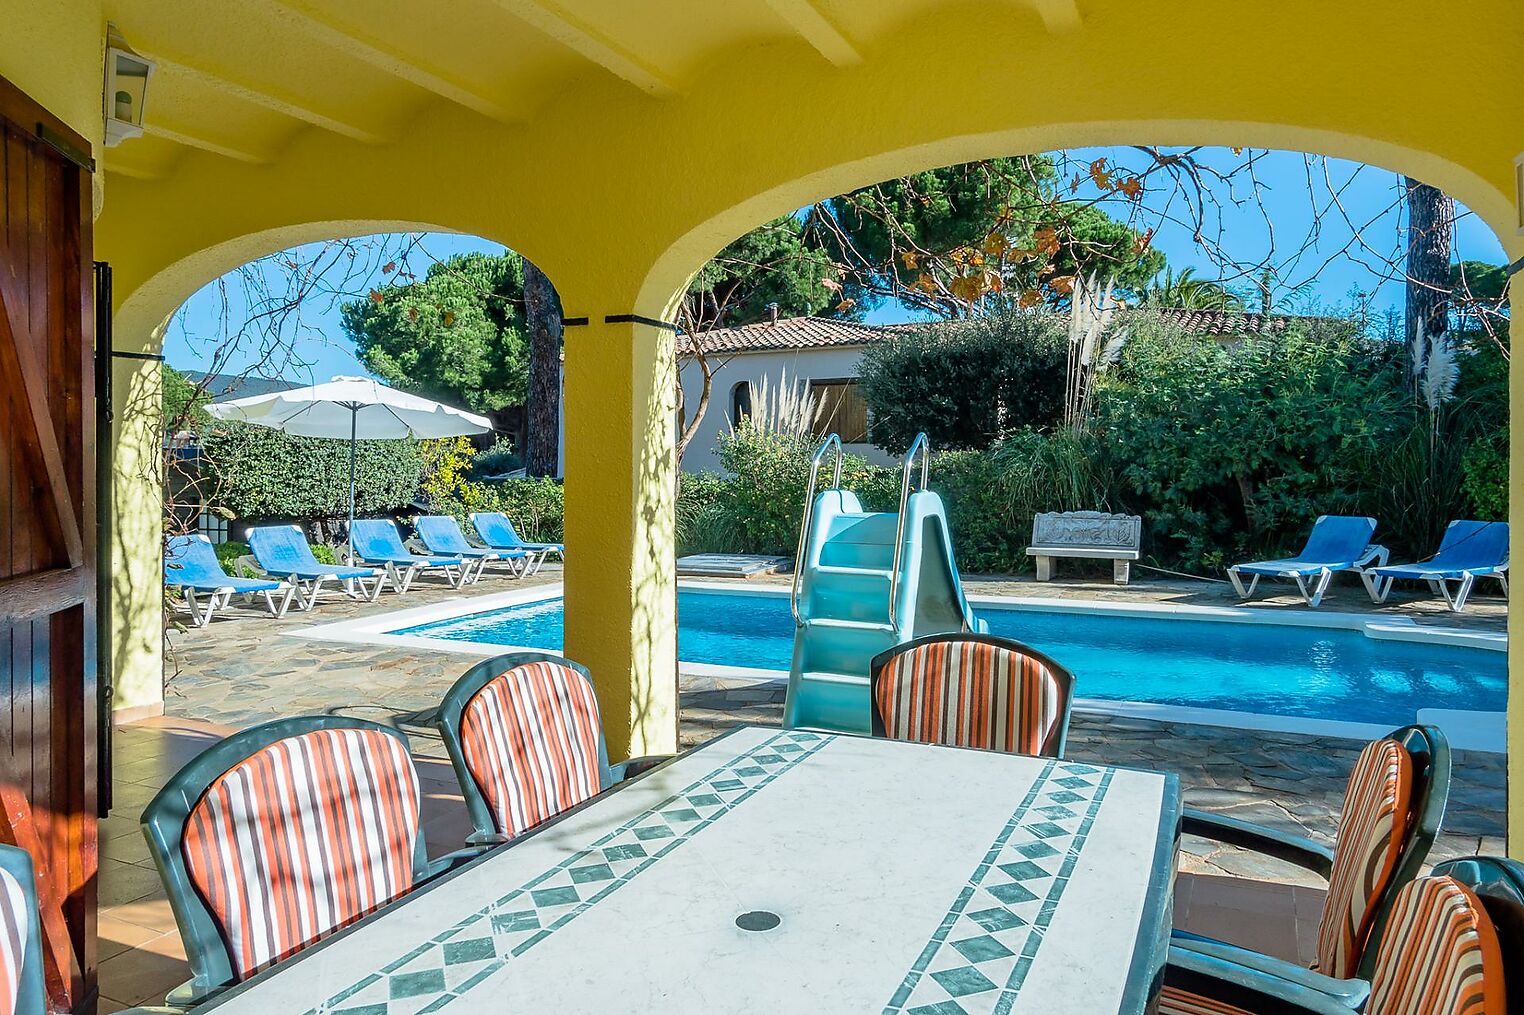 Detached villa set on a beautiful plot in a quiet residential area, just 10 mins drive to the beach.